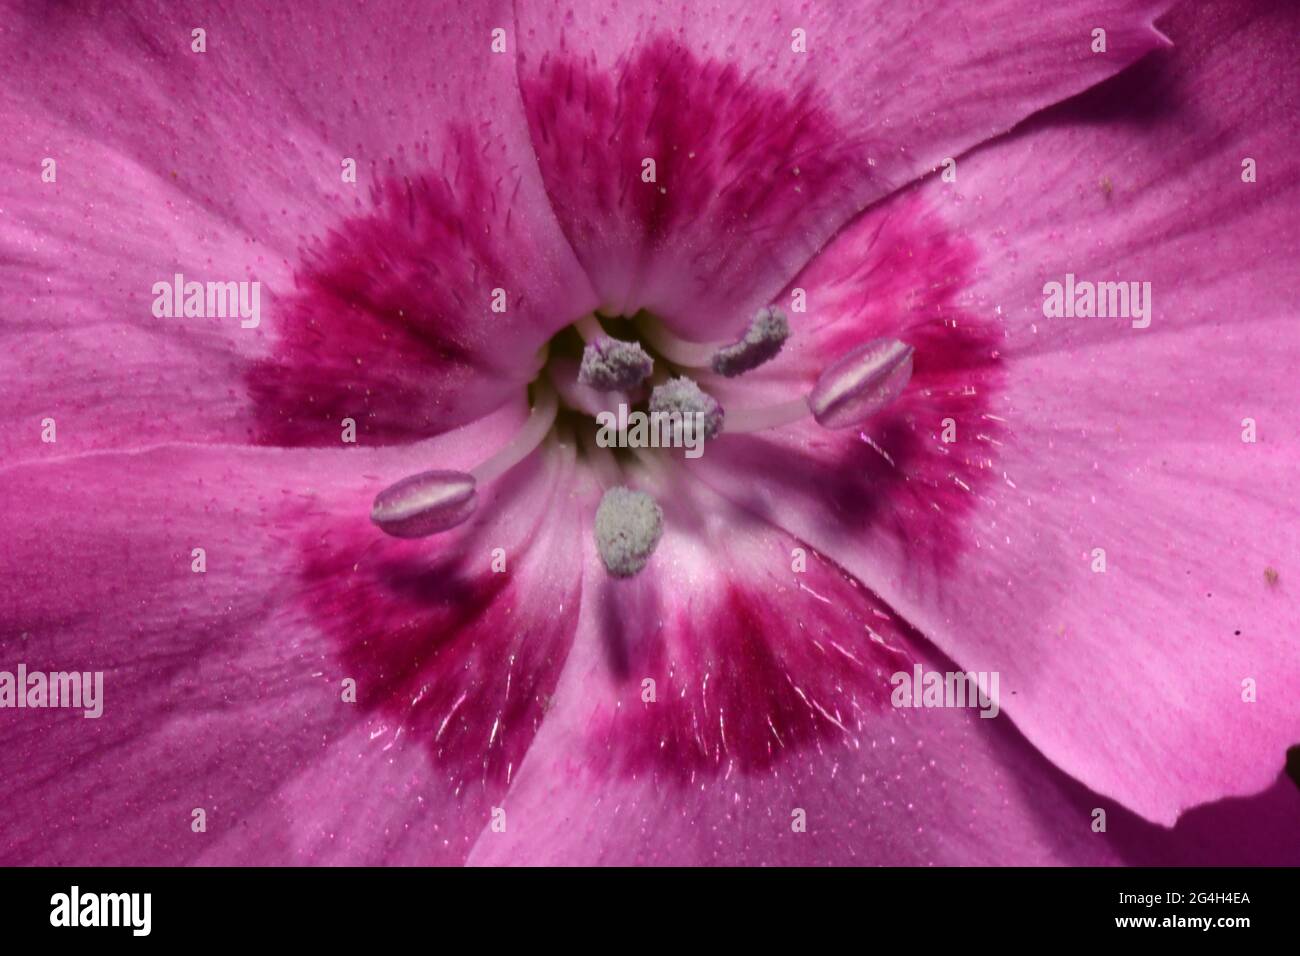 Pink Dianthus,close-up,showing the Stamen consisting of the filament with the Anther on its tip.Growing in a Somerset garden. Stock Photo